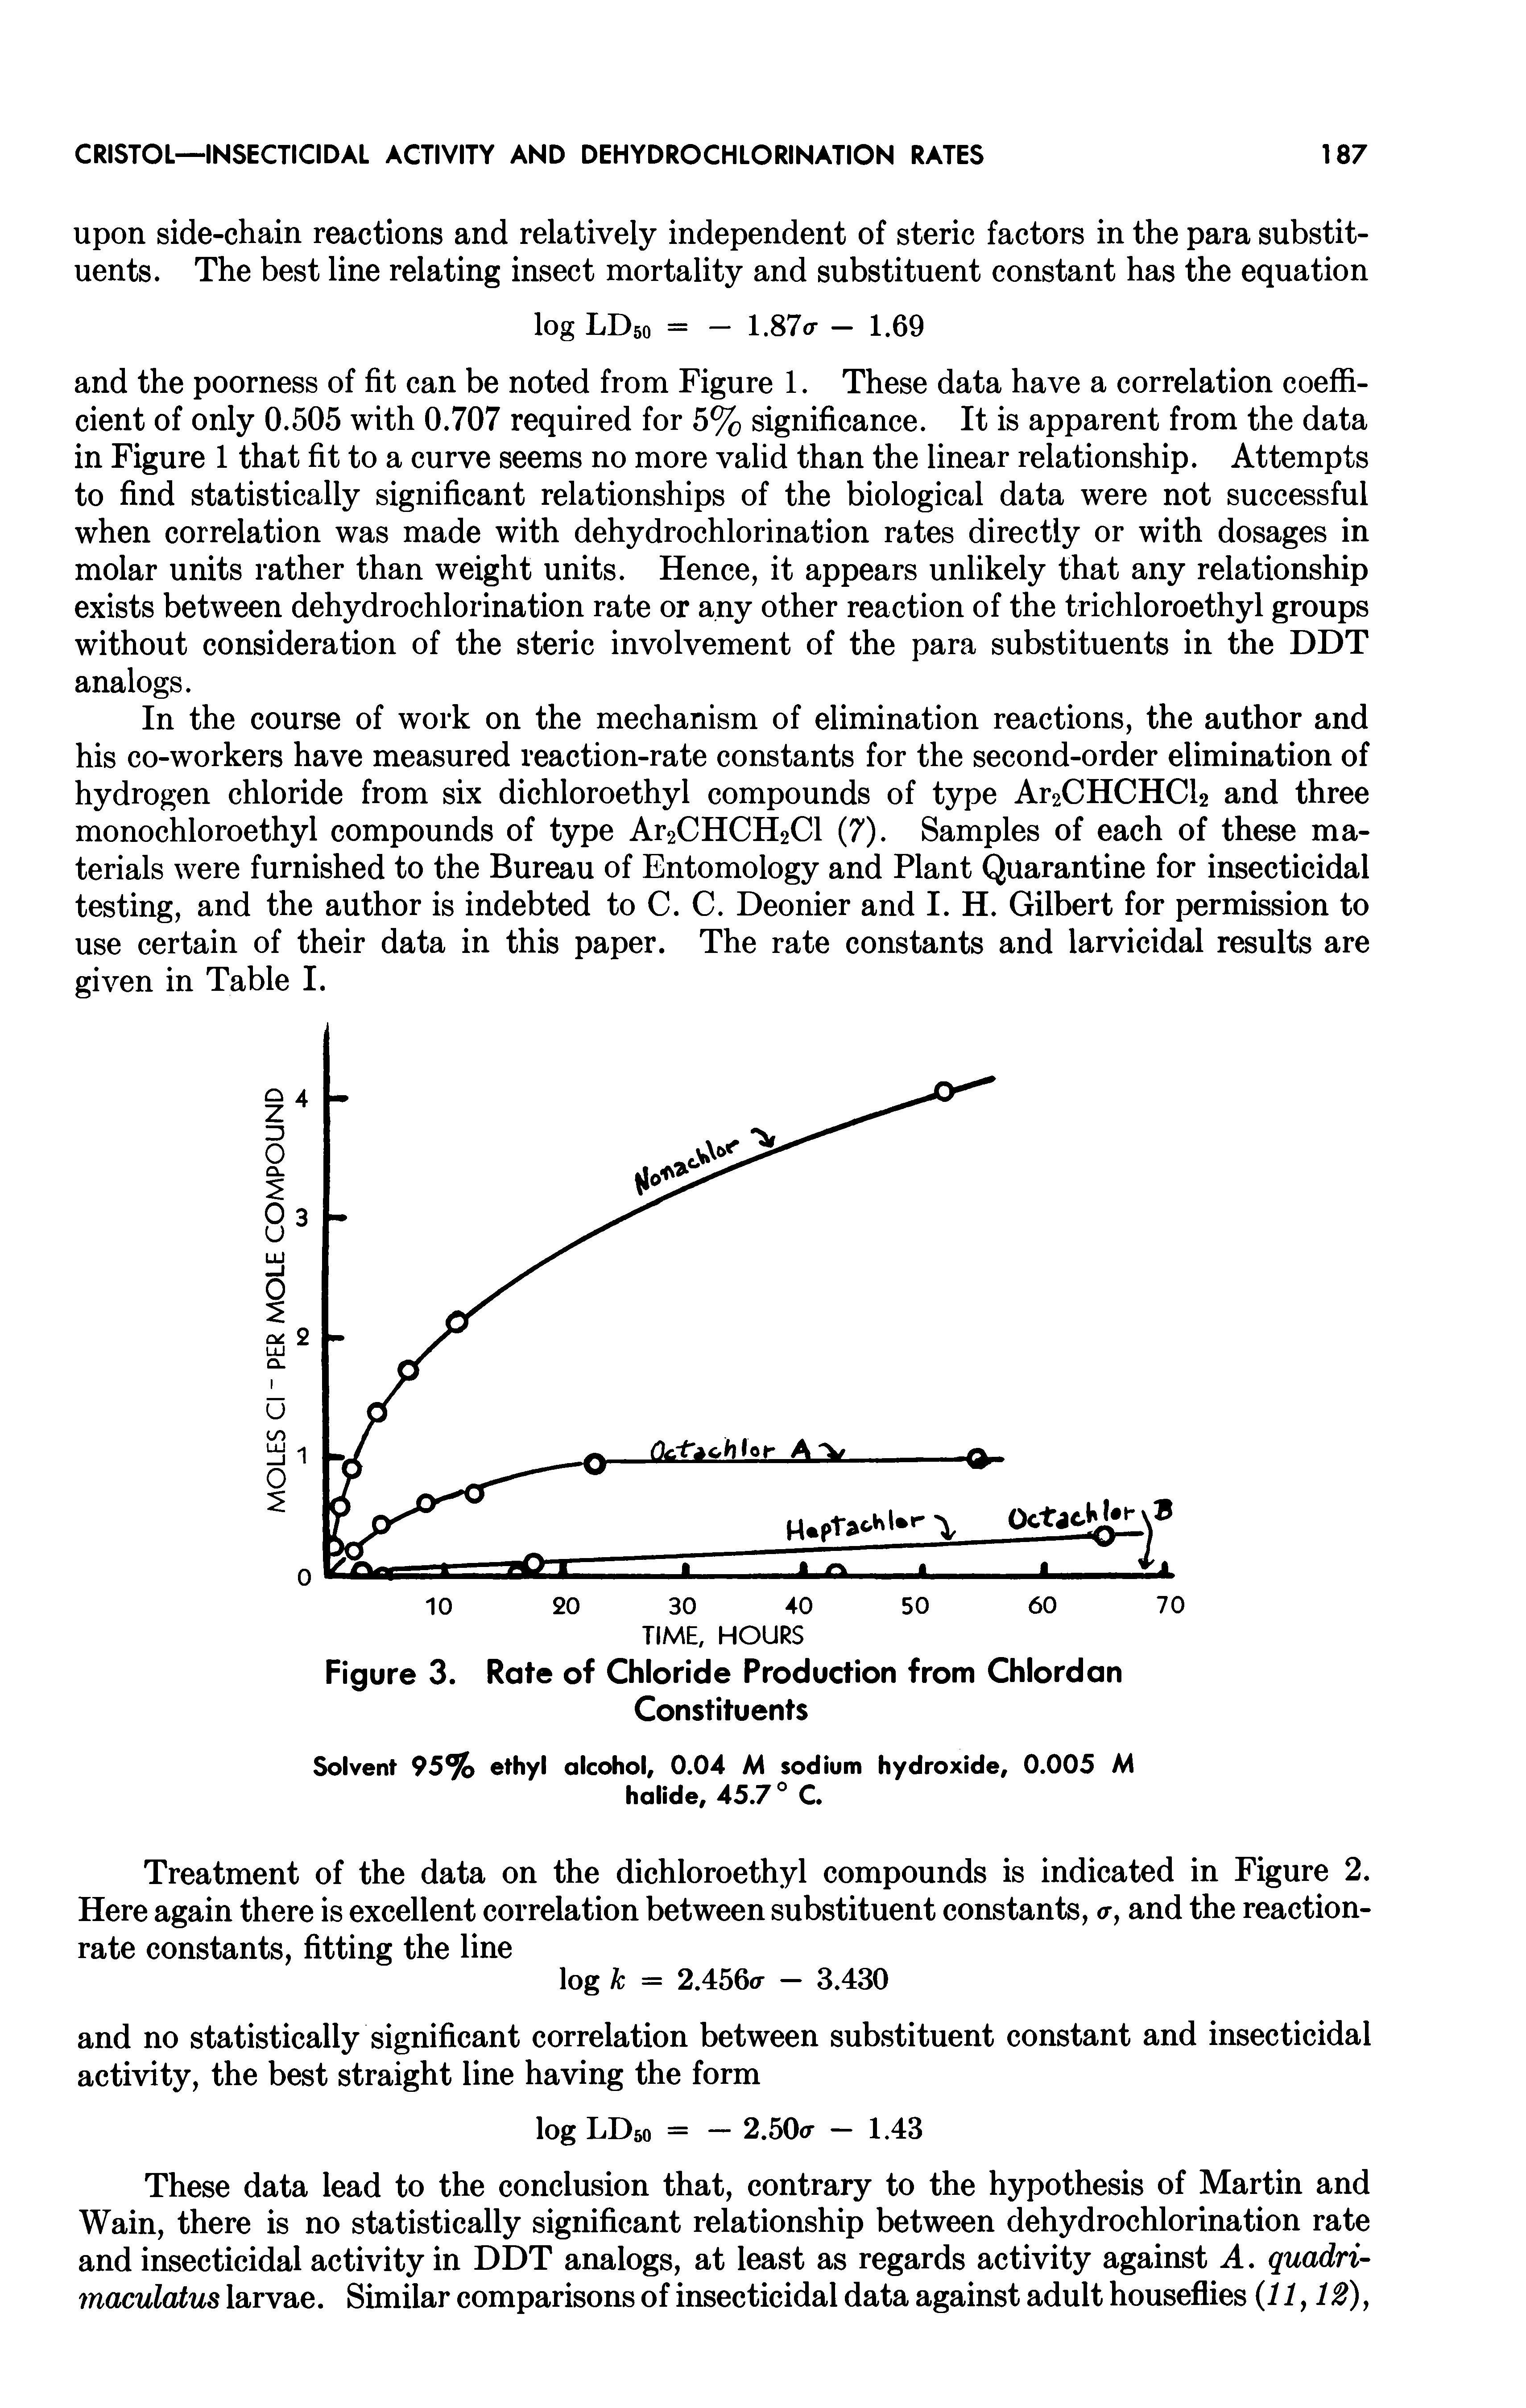 Figure 3. Rate of Chloride Production from Chlordan Constituents...